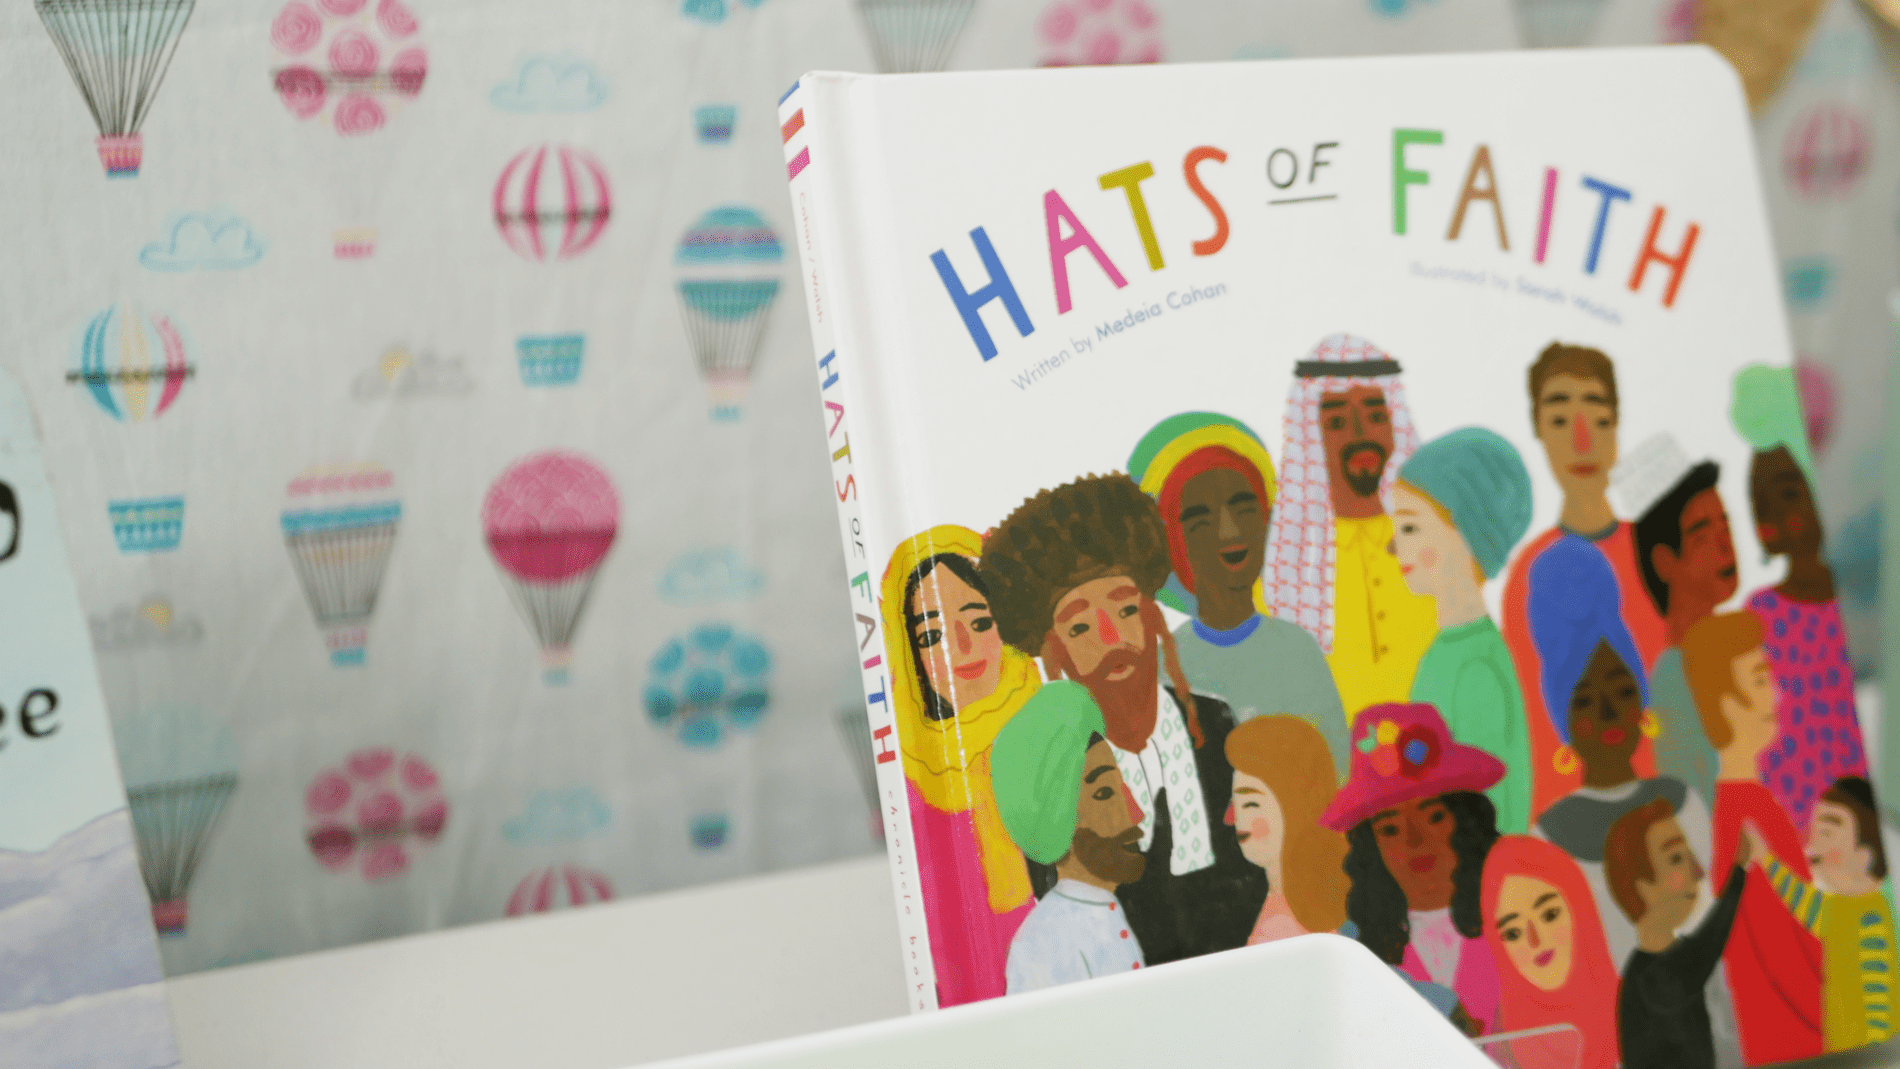 hats of faiths book from RE lesson at horton kirby primary school